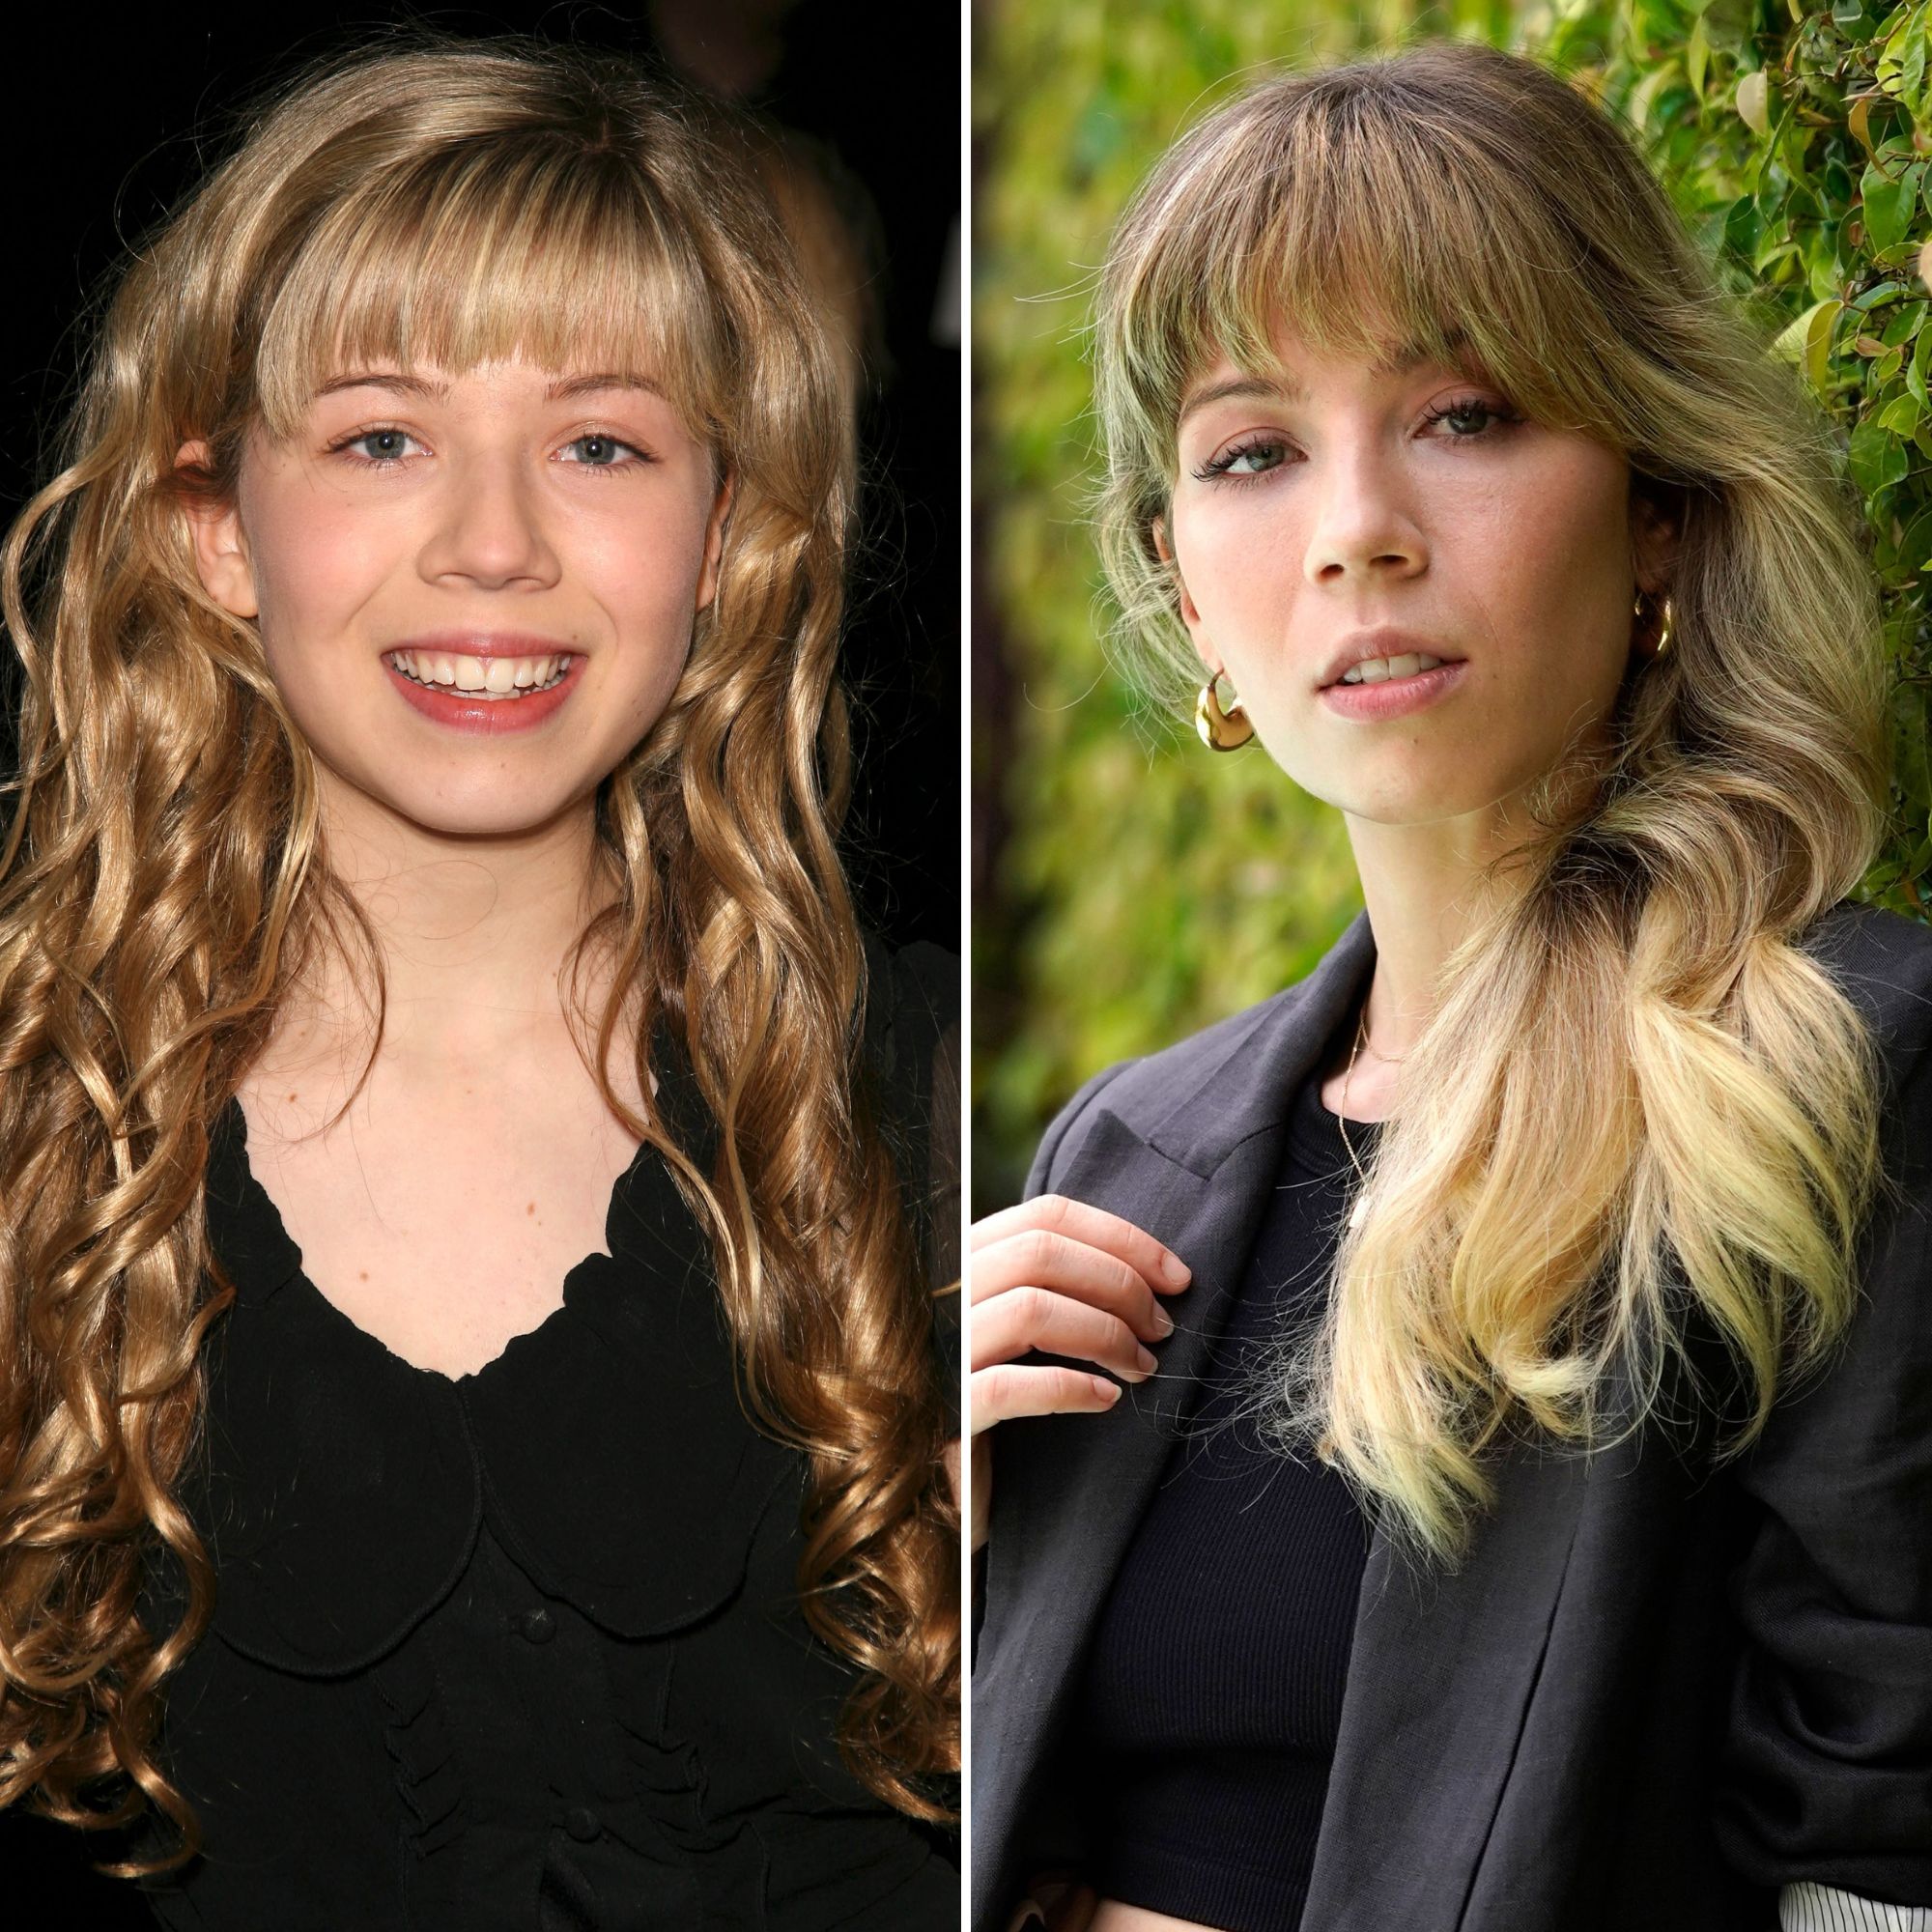 diane nipper recommends jennette mccurdy exposed pic